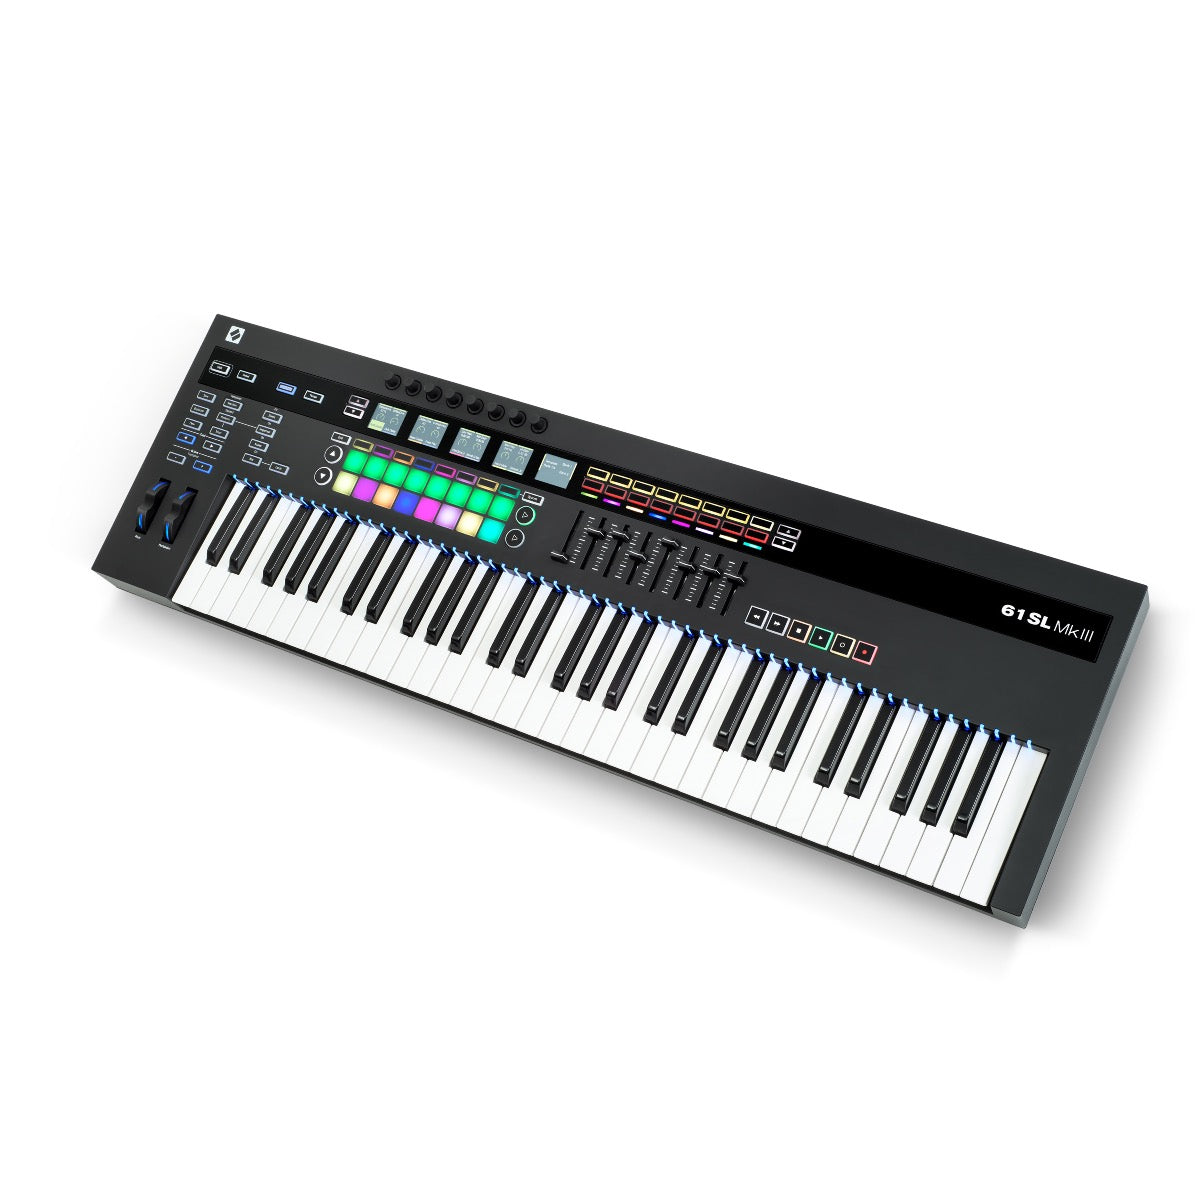 Novation 61SL MKIII Keyboard Controller and Sequencer CABLE KIT 